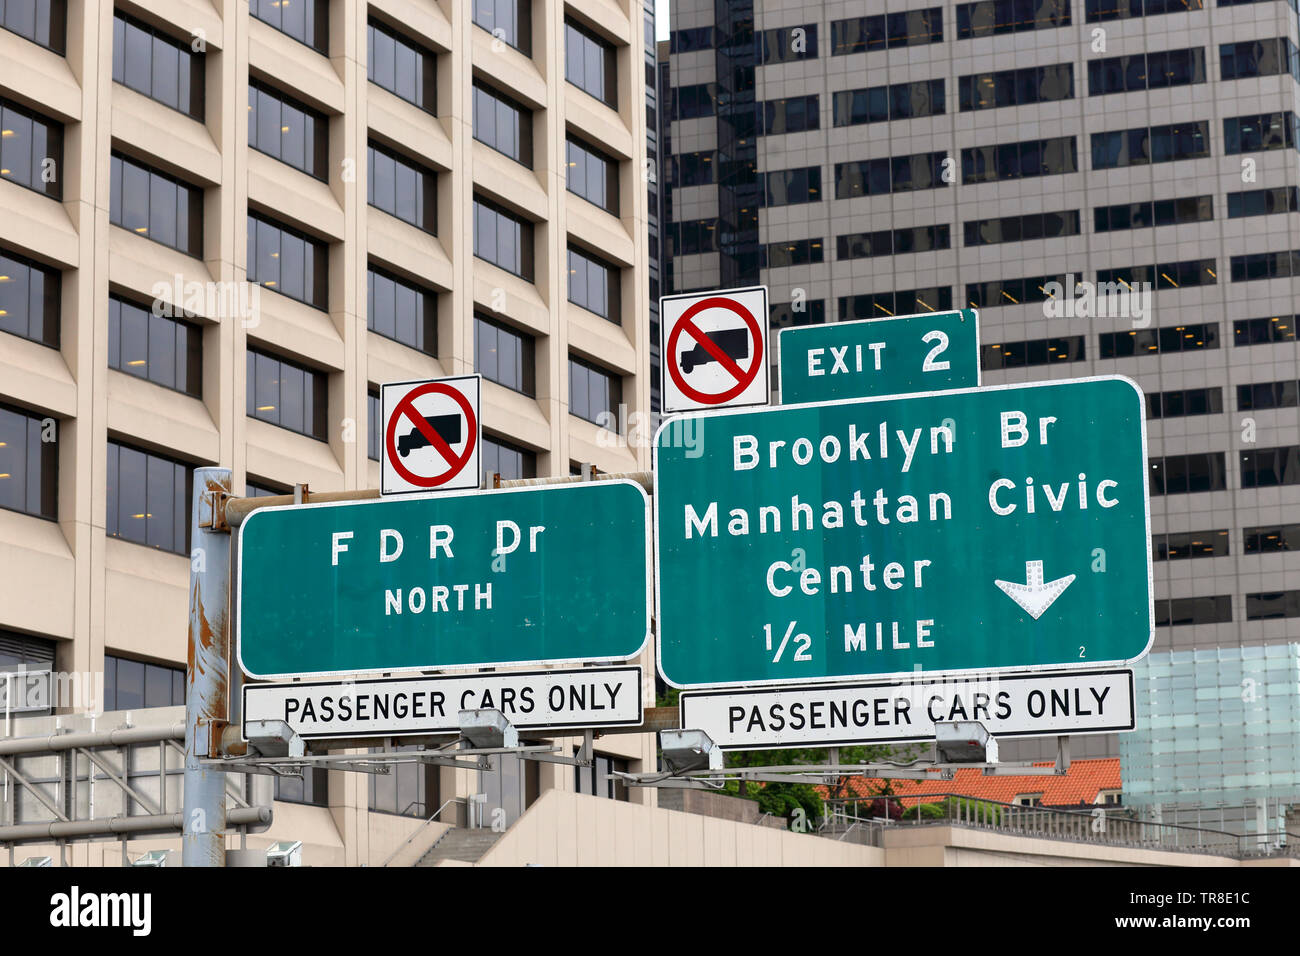 Highway signs on the FDR Drive, New York pointing drivers toward the Brooklyn Bridge, and to the Civic Center. Signs set against a backdrop of Manhatt Stock Photo